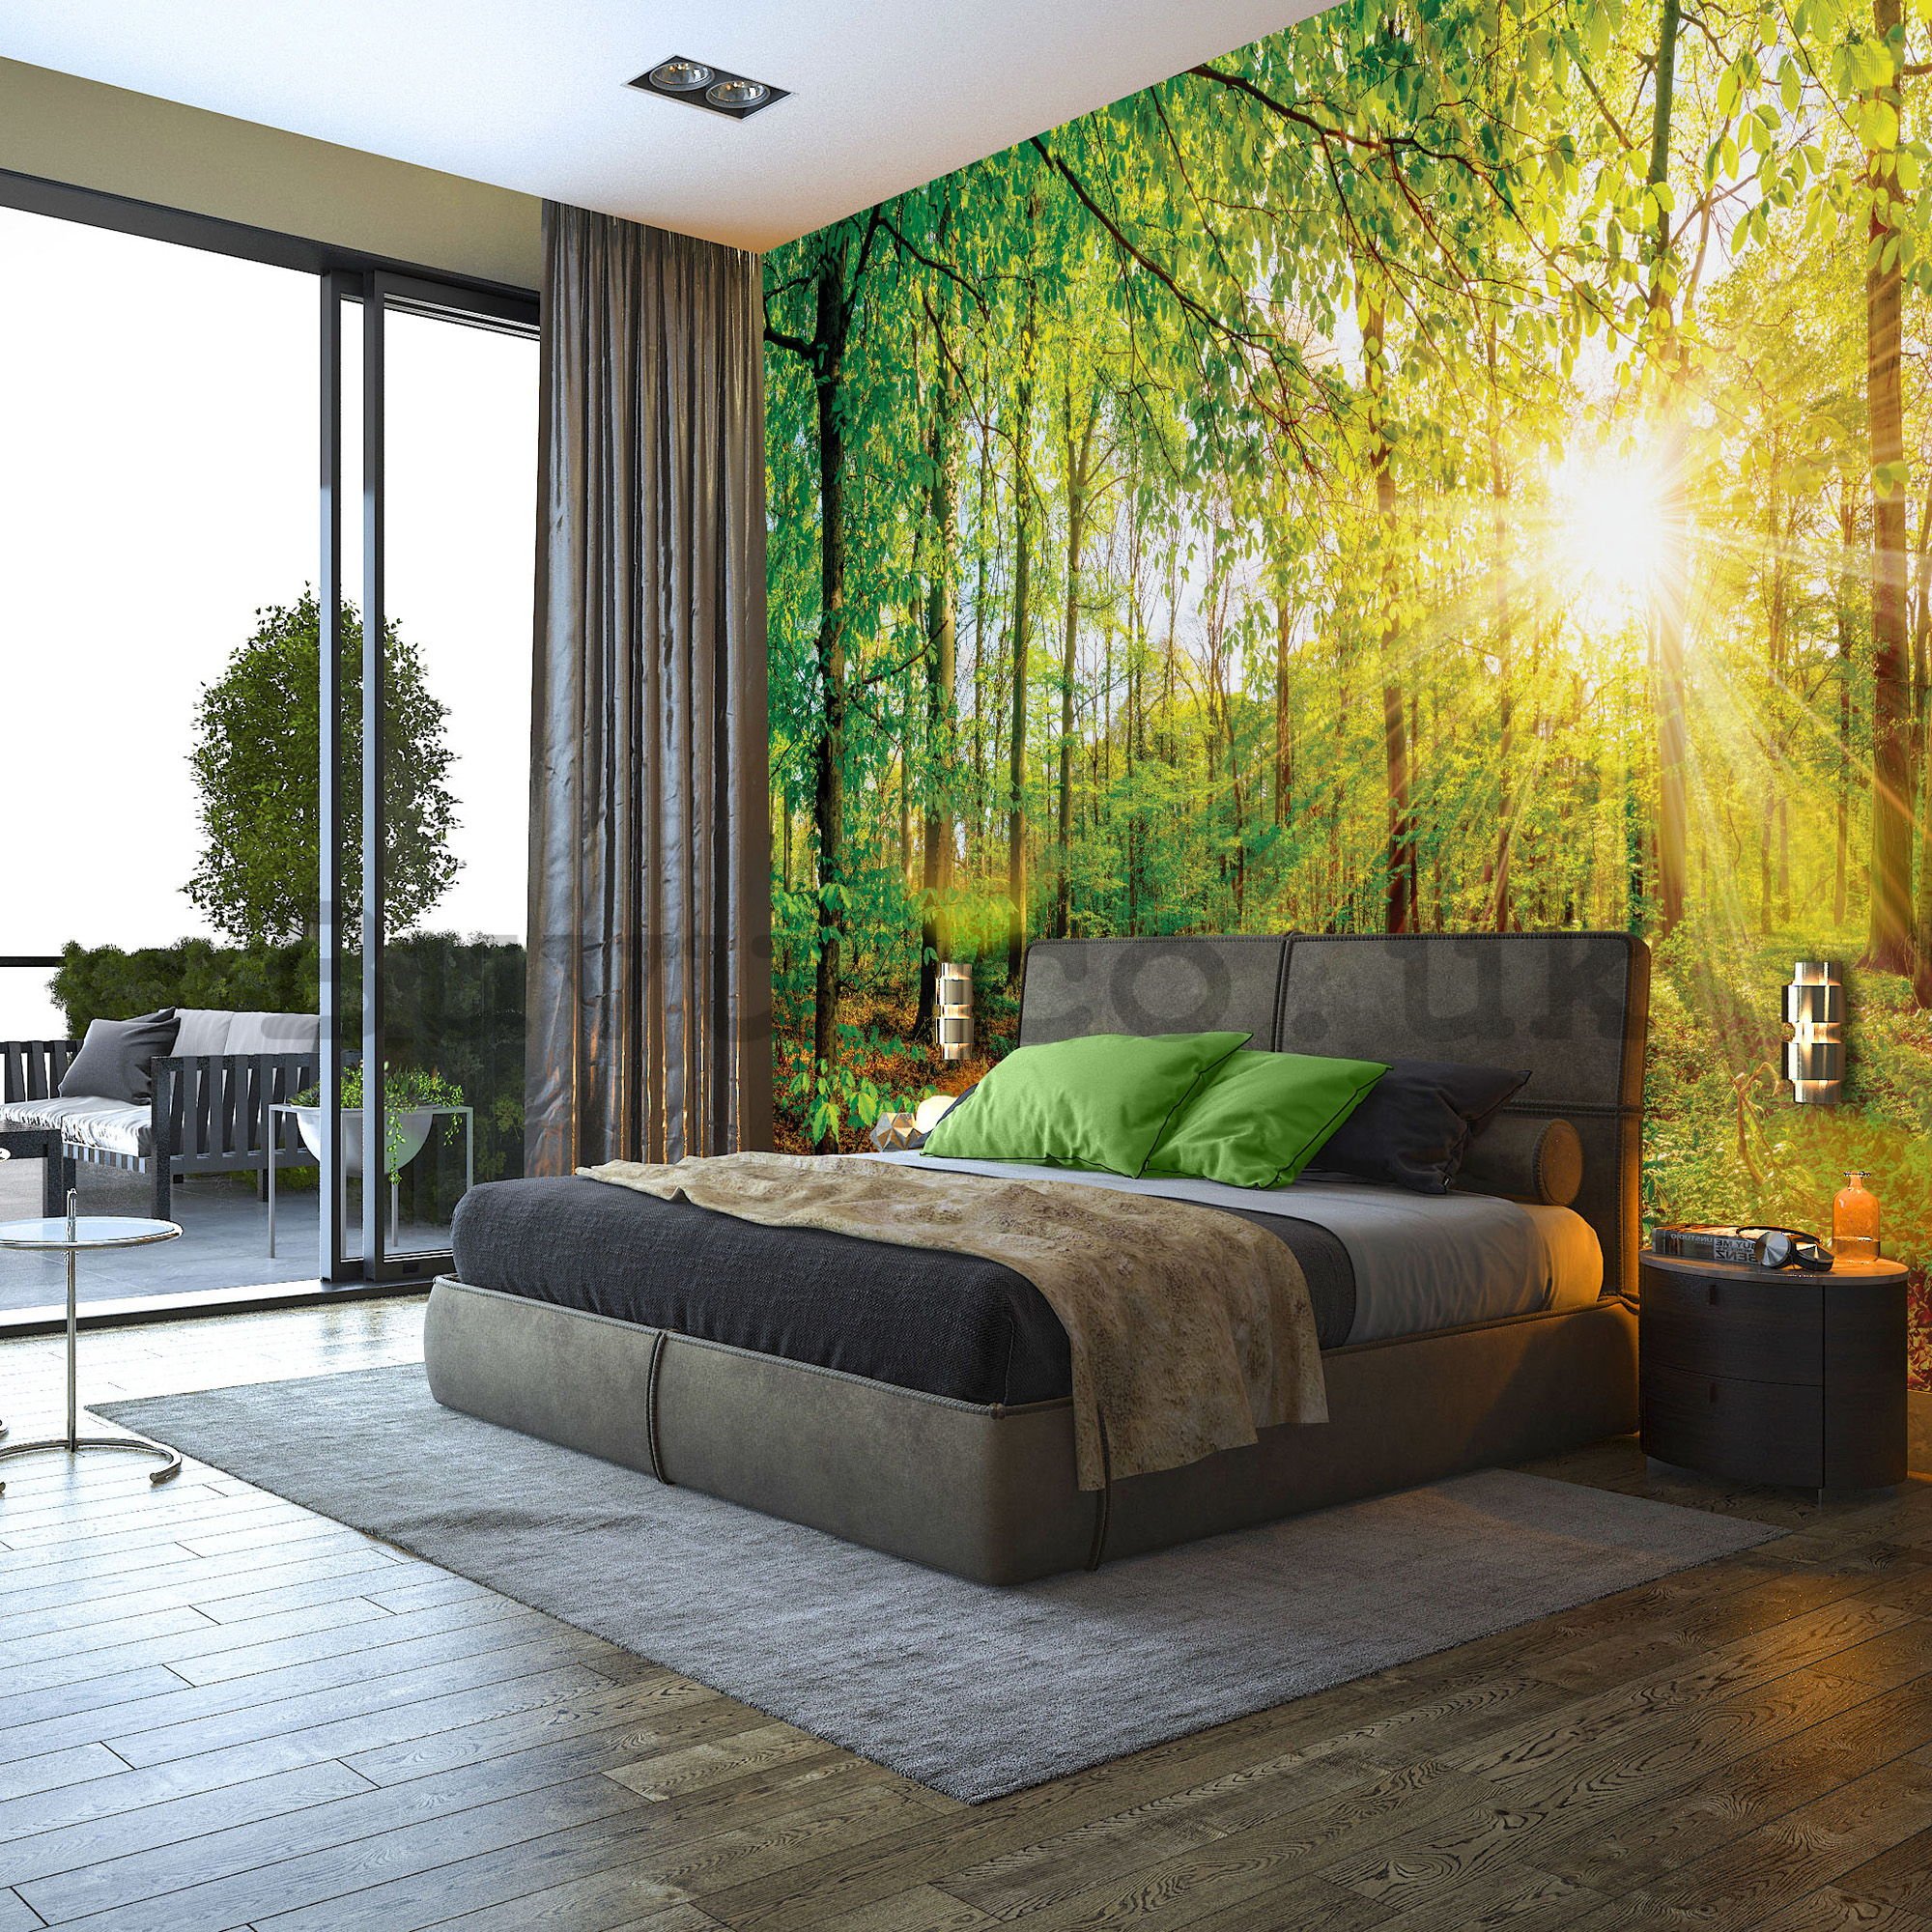 Wall mural: View of the forest - 254x368 cm